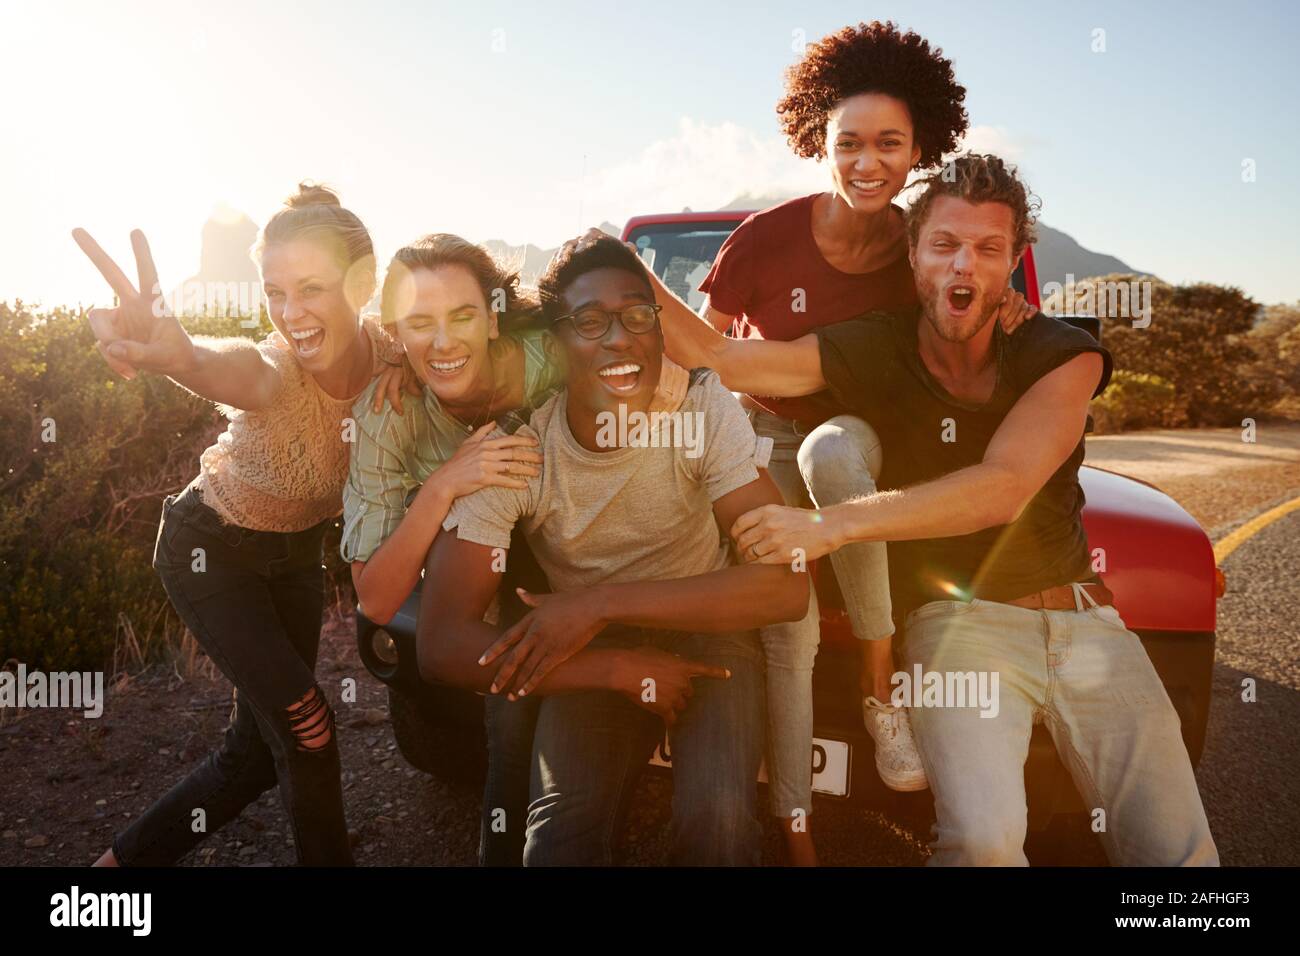 Five millennial friends on a road trip have fun posing for photos at the roadside, lens flare Stock Photo